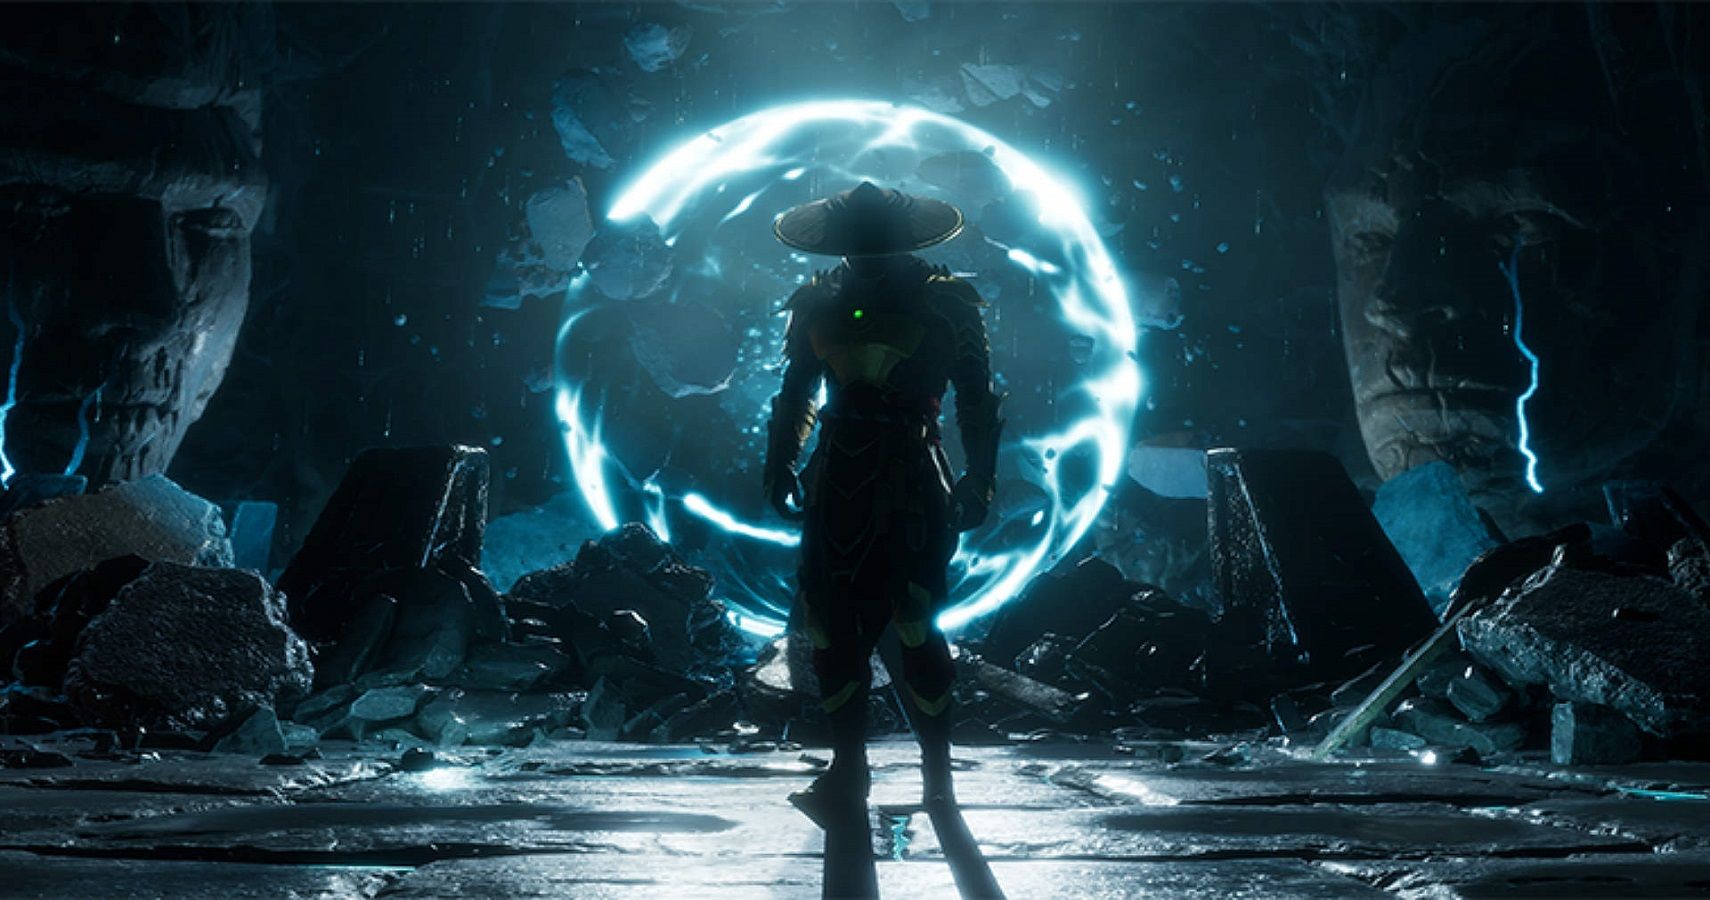 Mortal Kombat co-creator Ed Boon teases DLC characters with kryptic tweets